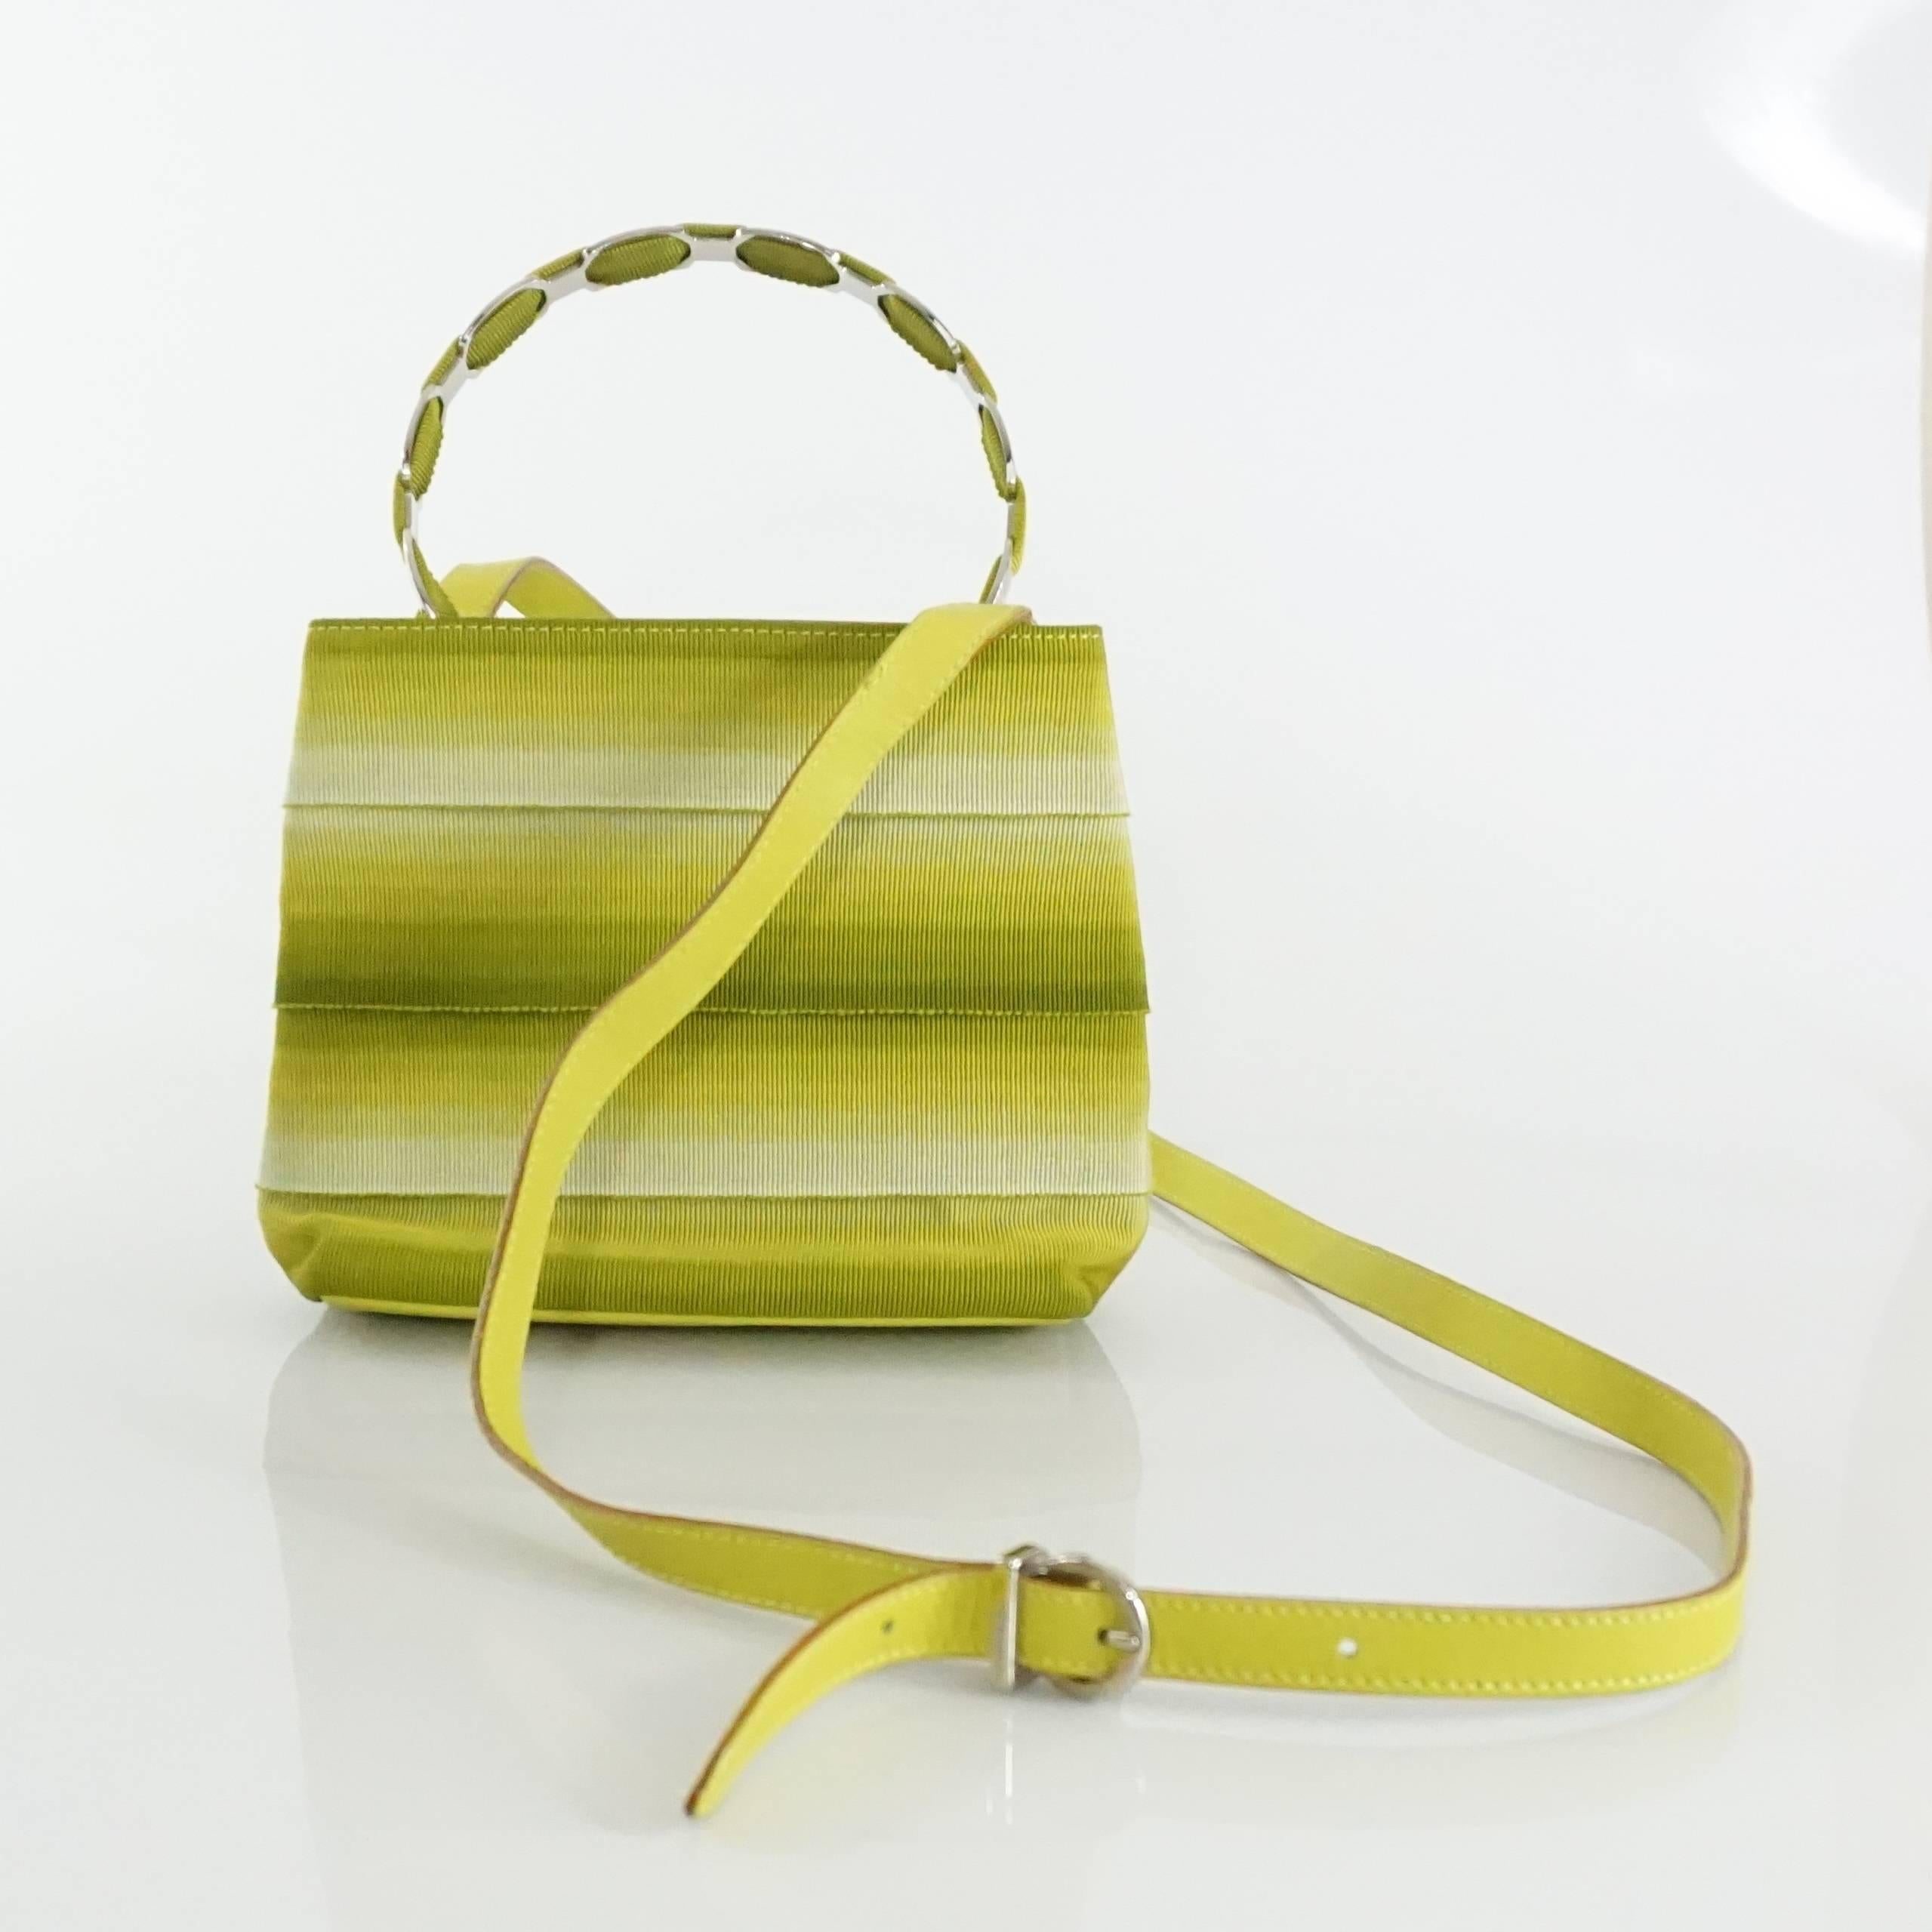 This Salvatore Ferragamo handbag is chartreuse and gros grain with a top handle. There is also an included crossbody strap and a silver closure. This bag is in very good condition with minor wear on the strap.

Measurements
Length: 6.75